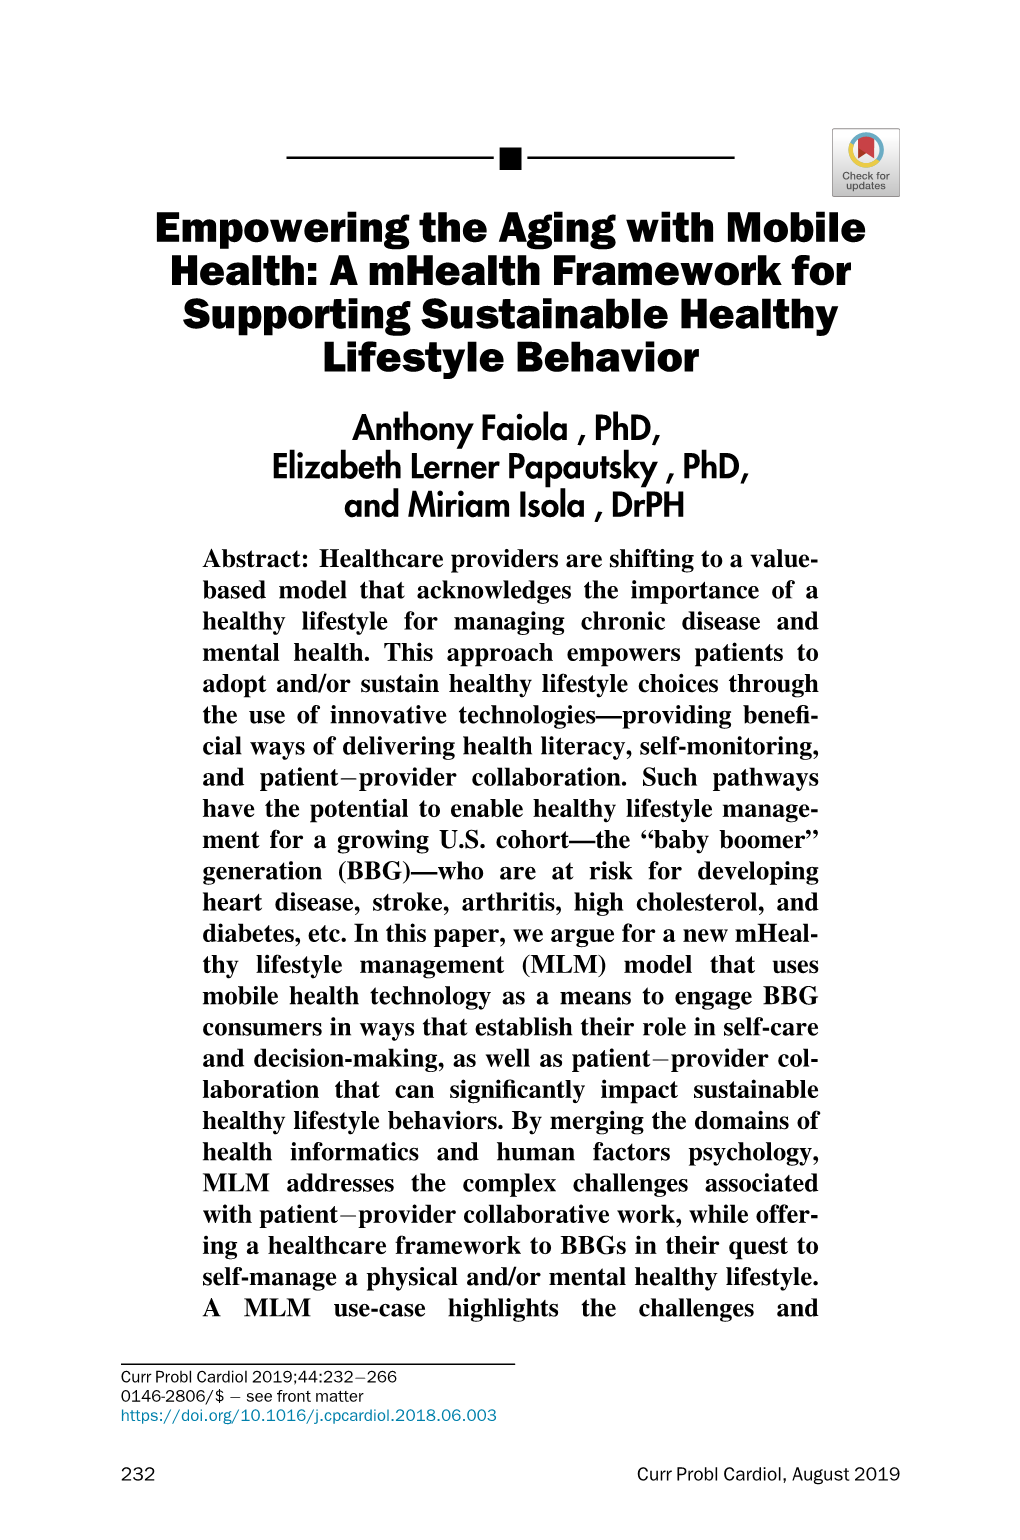 Empowering the Aging with Mobile Health: a Mhealth Framework for Supporting Sustainable Healthy Lifestyle Behavior